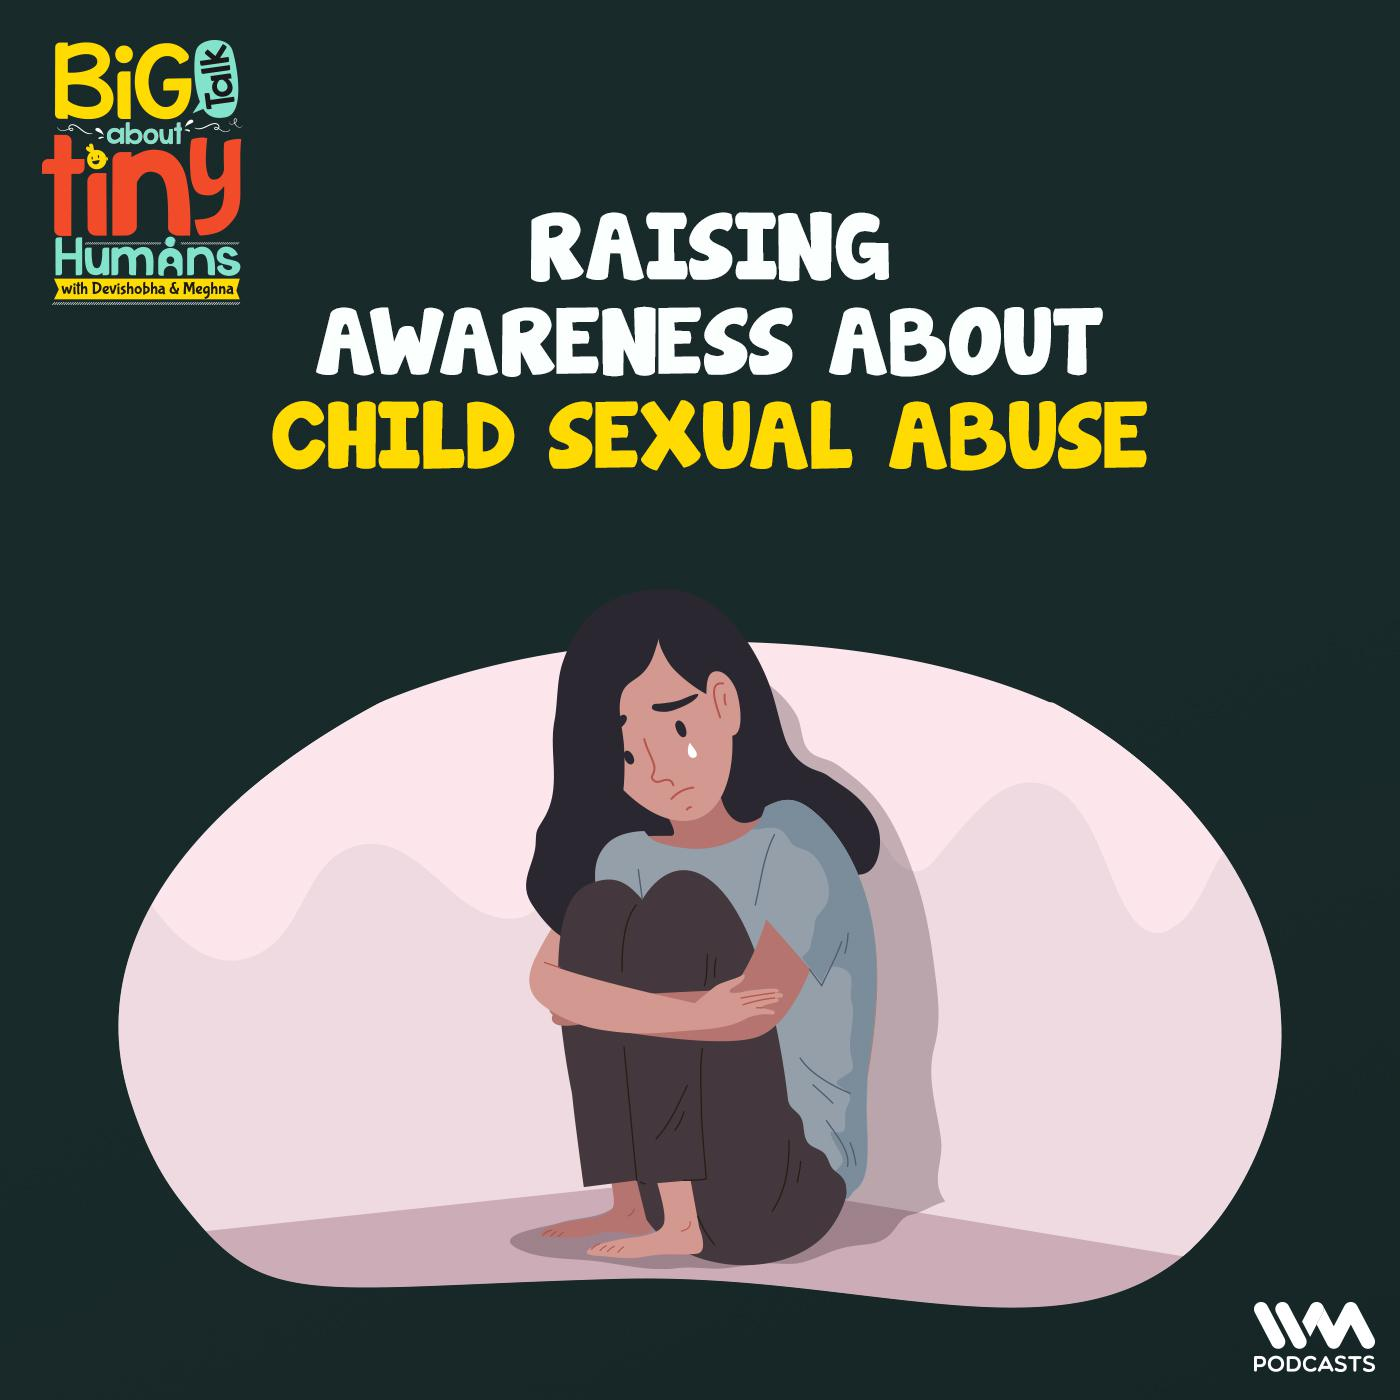 Raising awareness about child sexual abuse